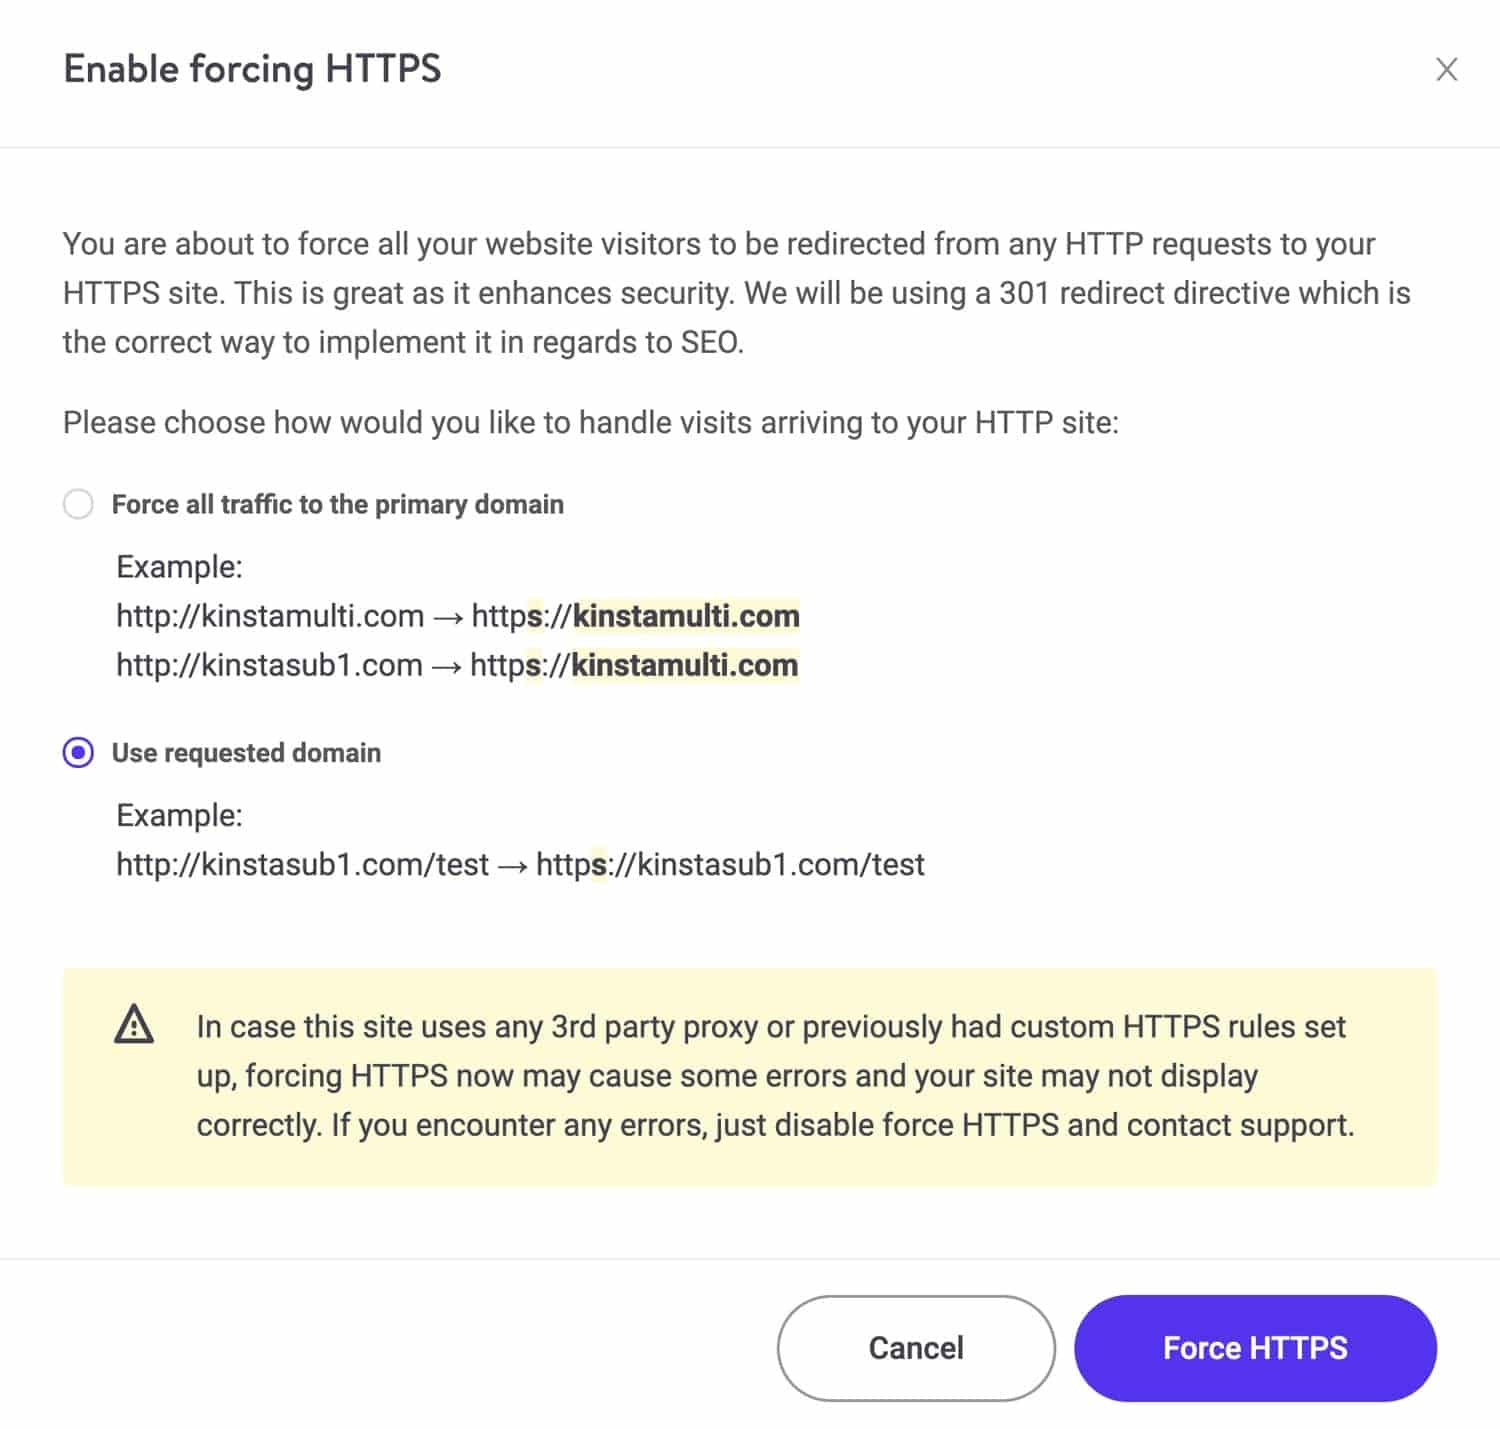 Enable force HTTPS with use requested domain option in MyKinsta.